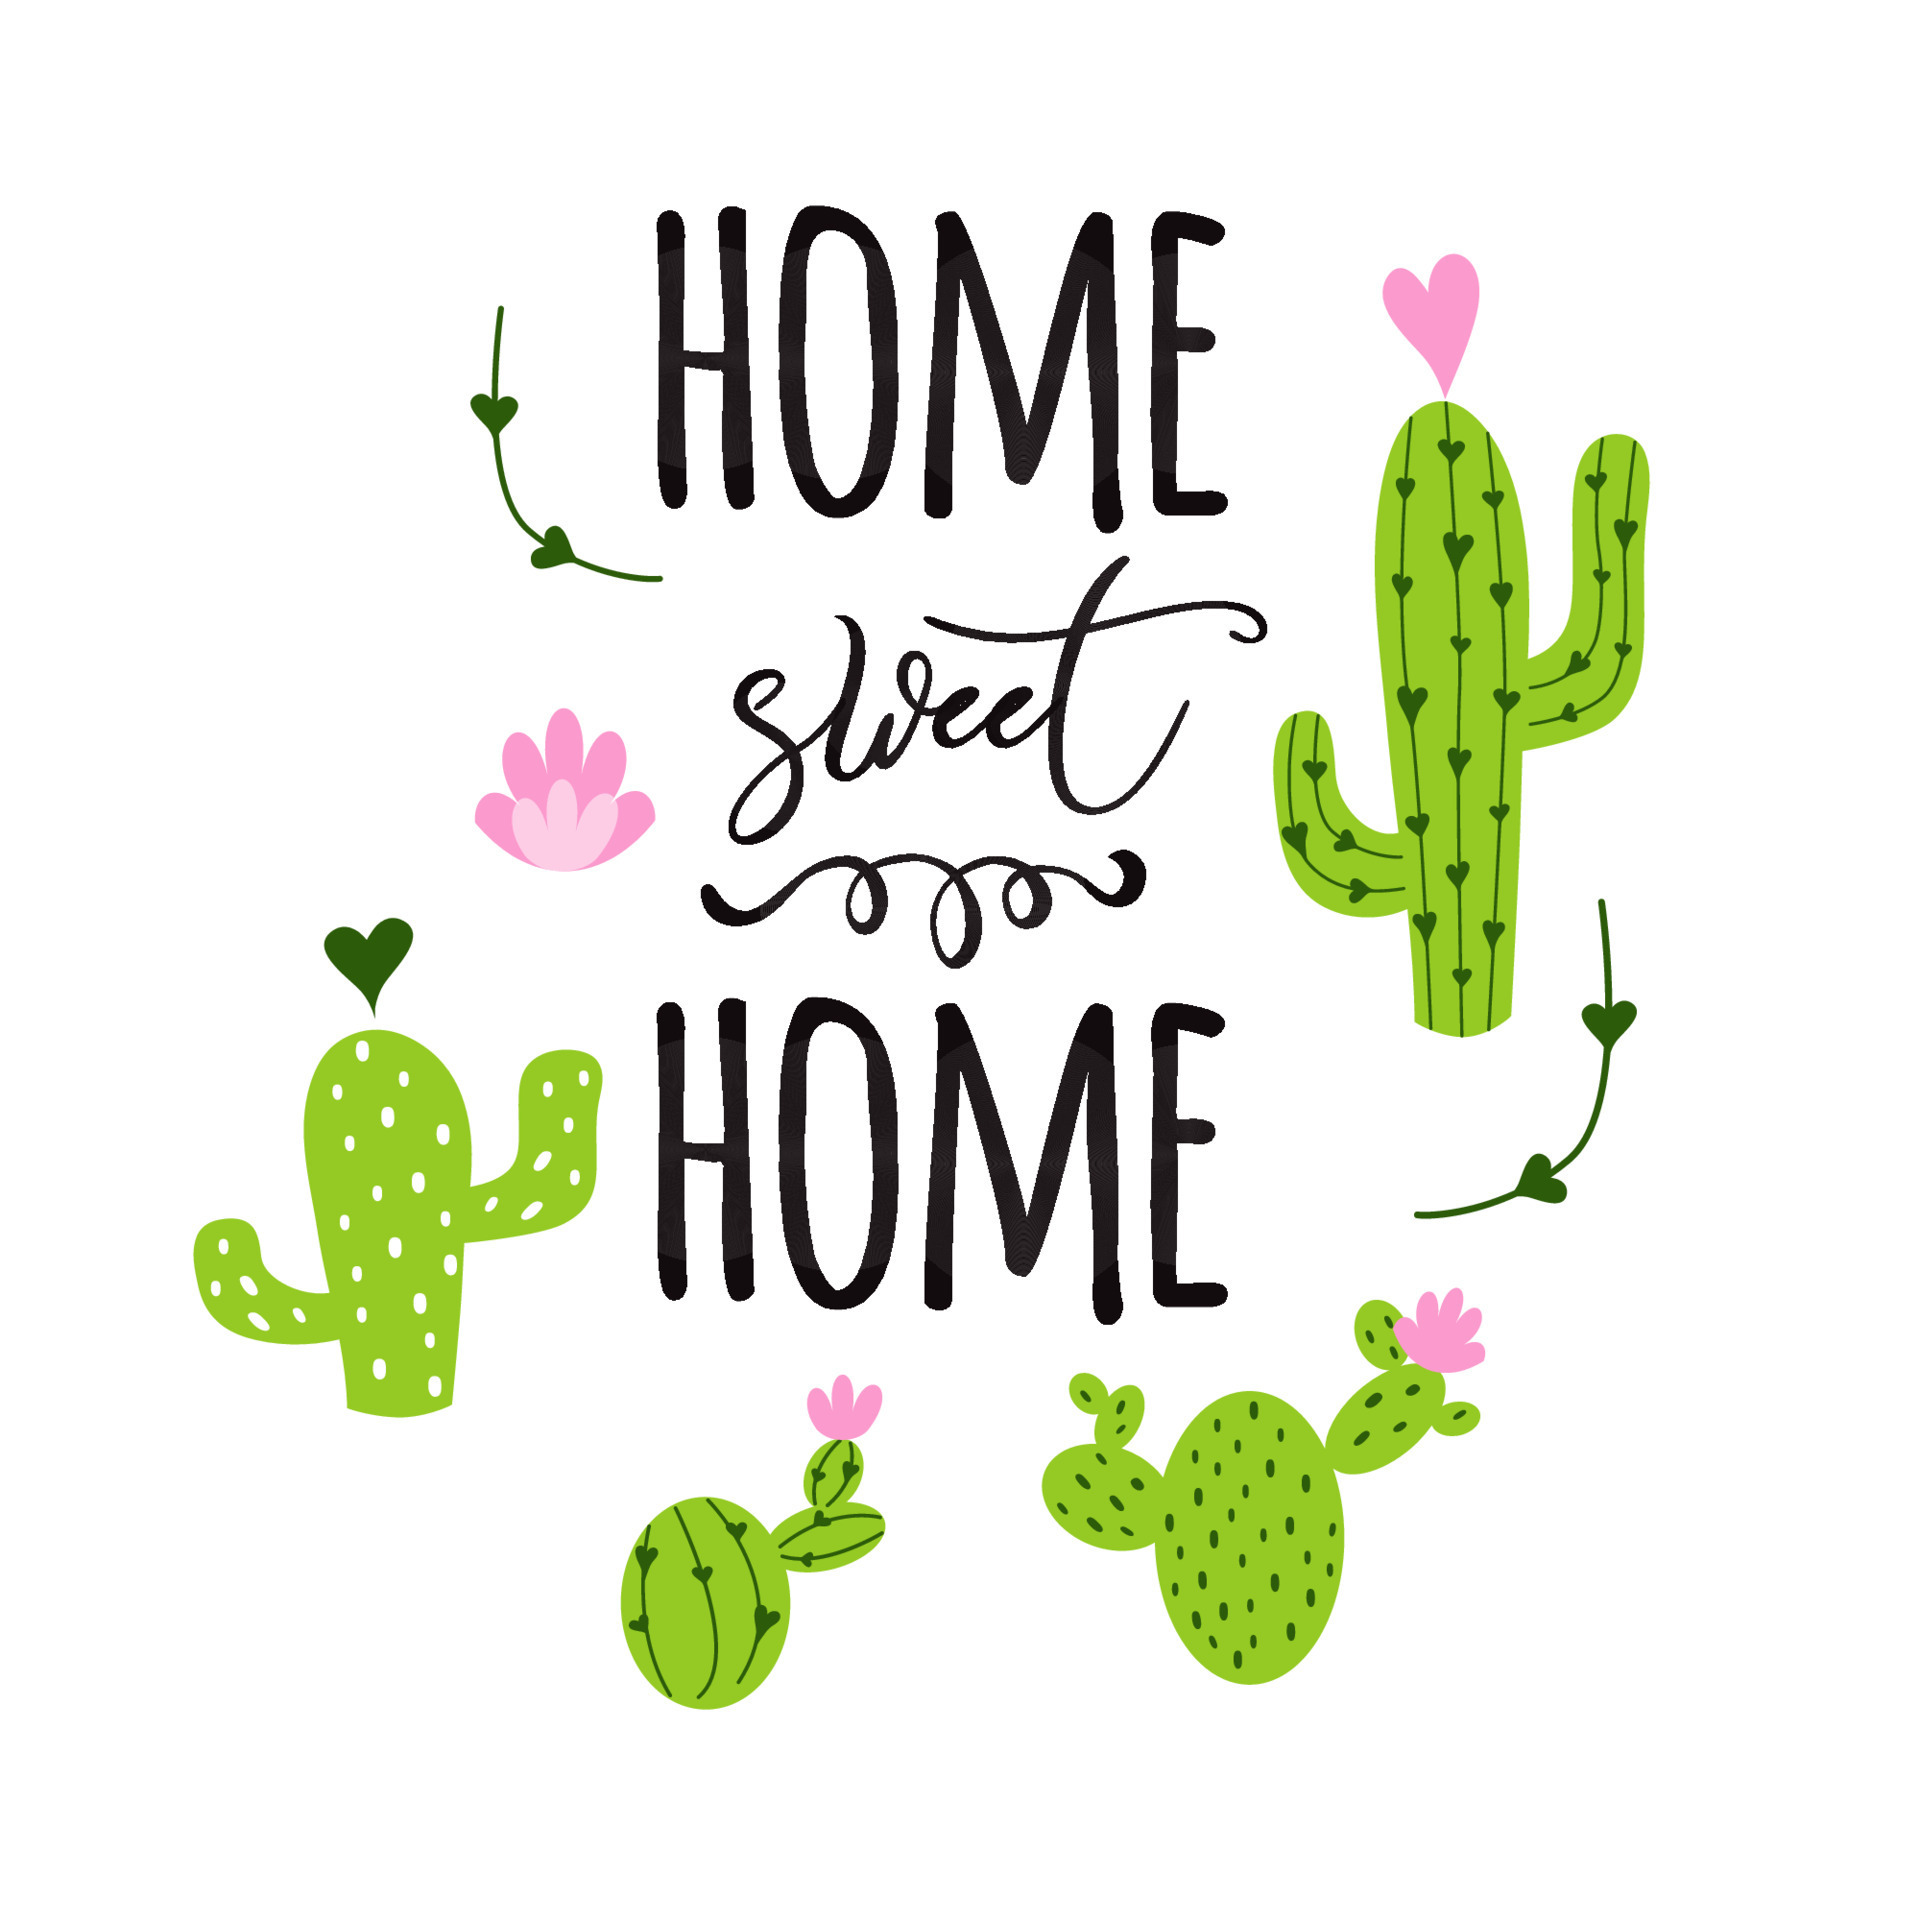 https://static.vecteezy.com/system/resources/previews/024/151/561/original/home-sweet-hom-banner-prickly-cactus-with-heart-and-inspirational-quote-on-white-background-cute-hand-drawn-greeting-cards-poster-logo-sign-print-label-symbol-illustration-home-decor-vector.jpg